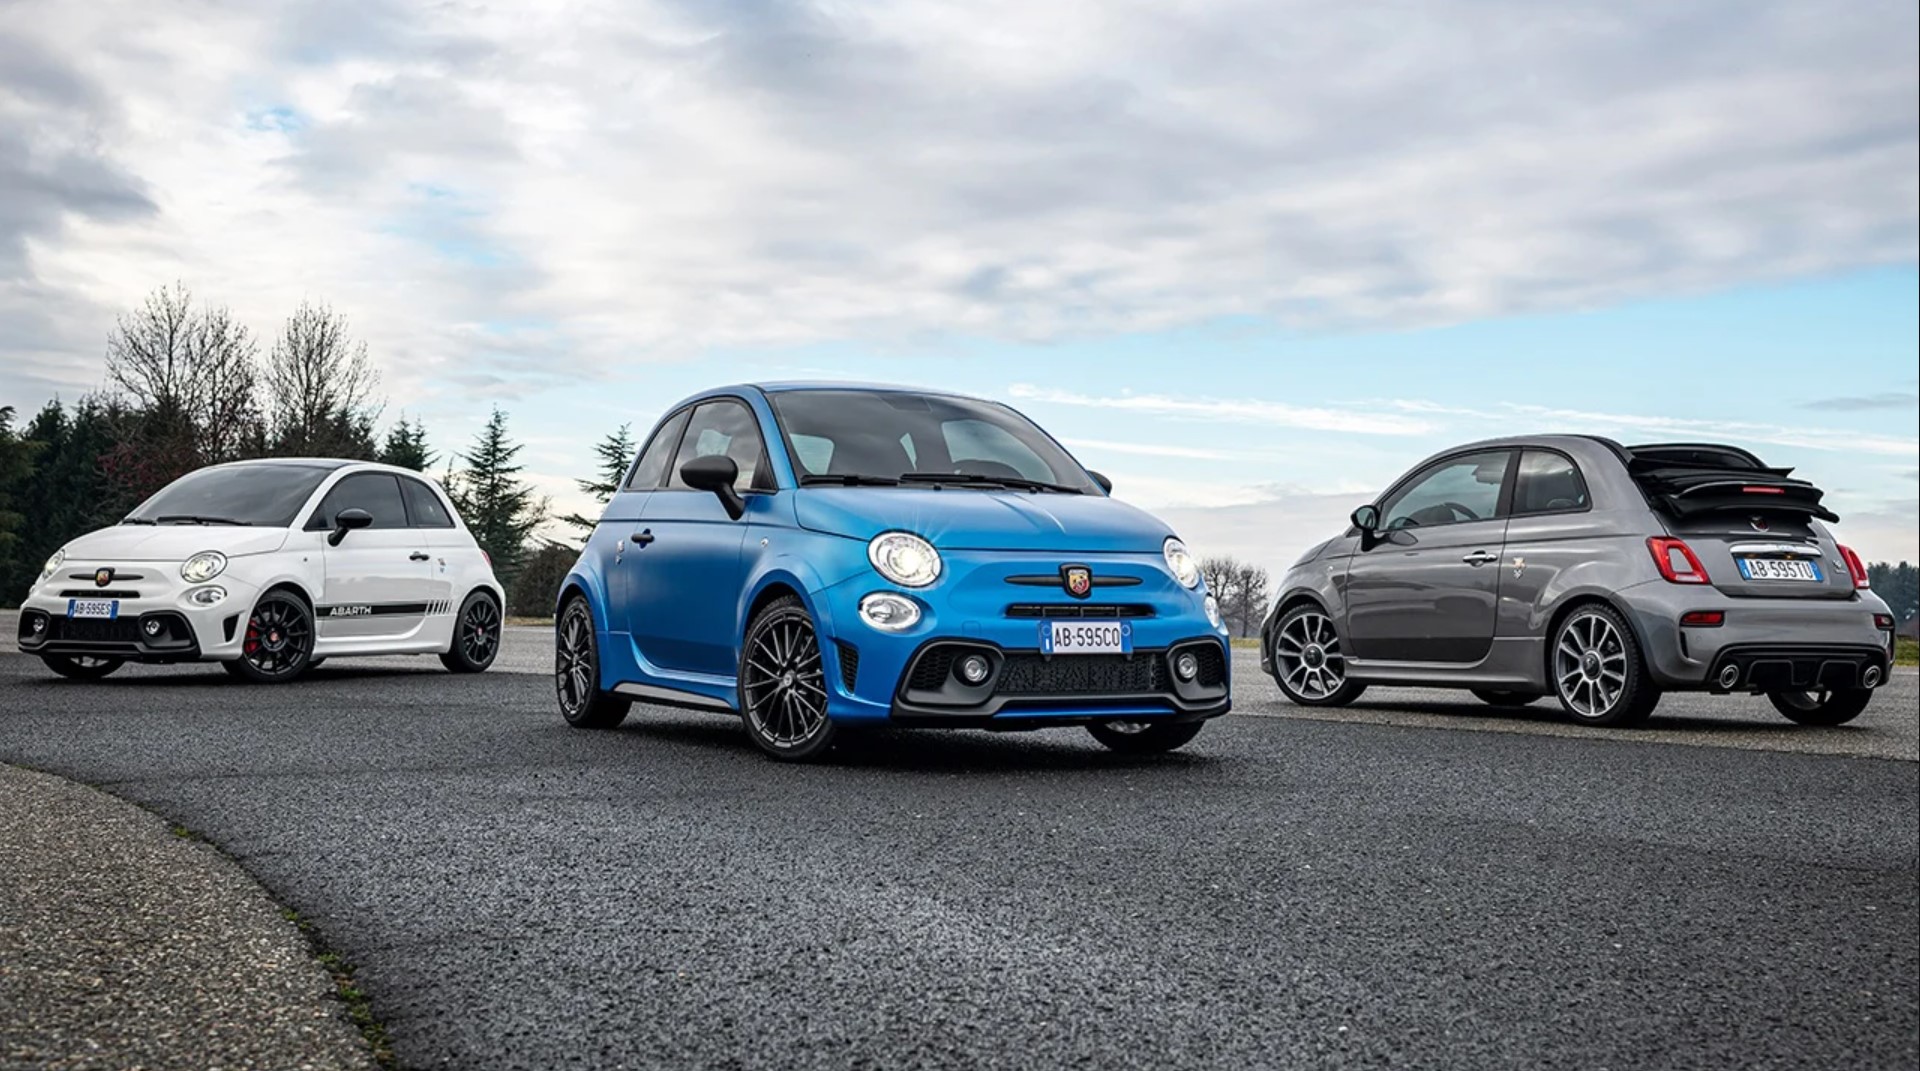 aria-label="ababarth"